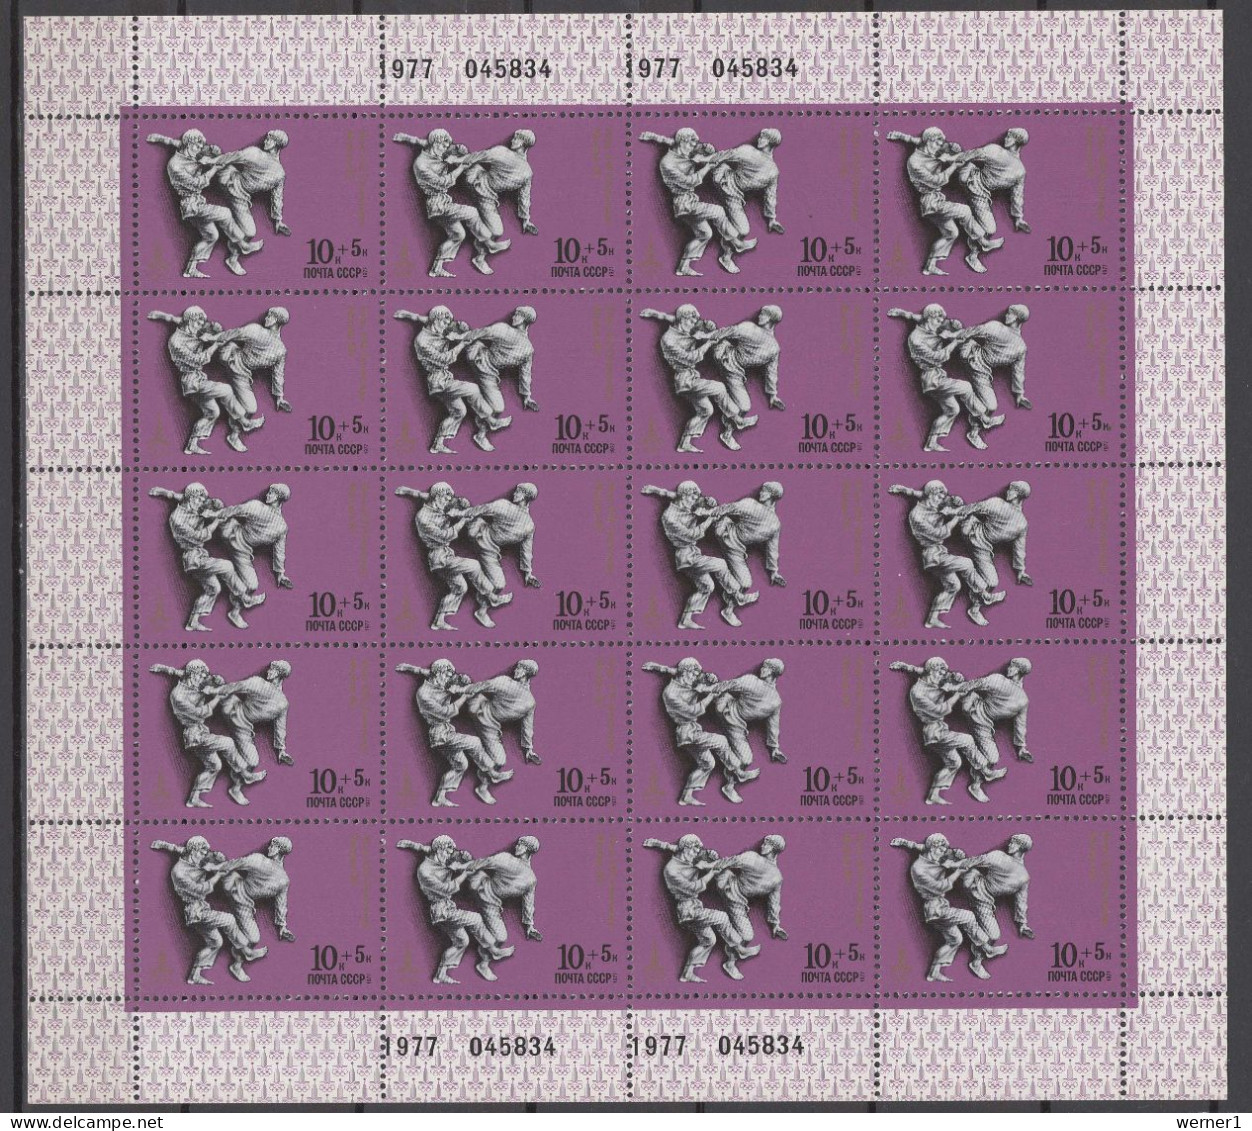 USSR Russia 1977 Olympic Games Moscow, Wrestling, Judo, Boxing, Weightlifting Set Of 5 Sheetlets MNH - Summer 1980: Moscow